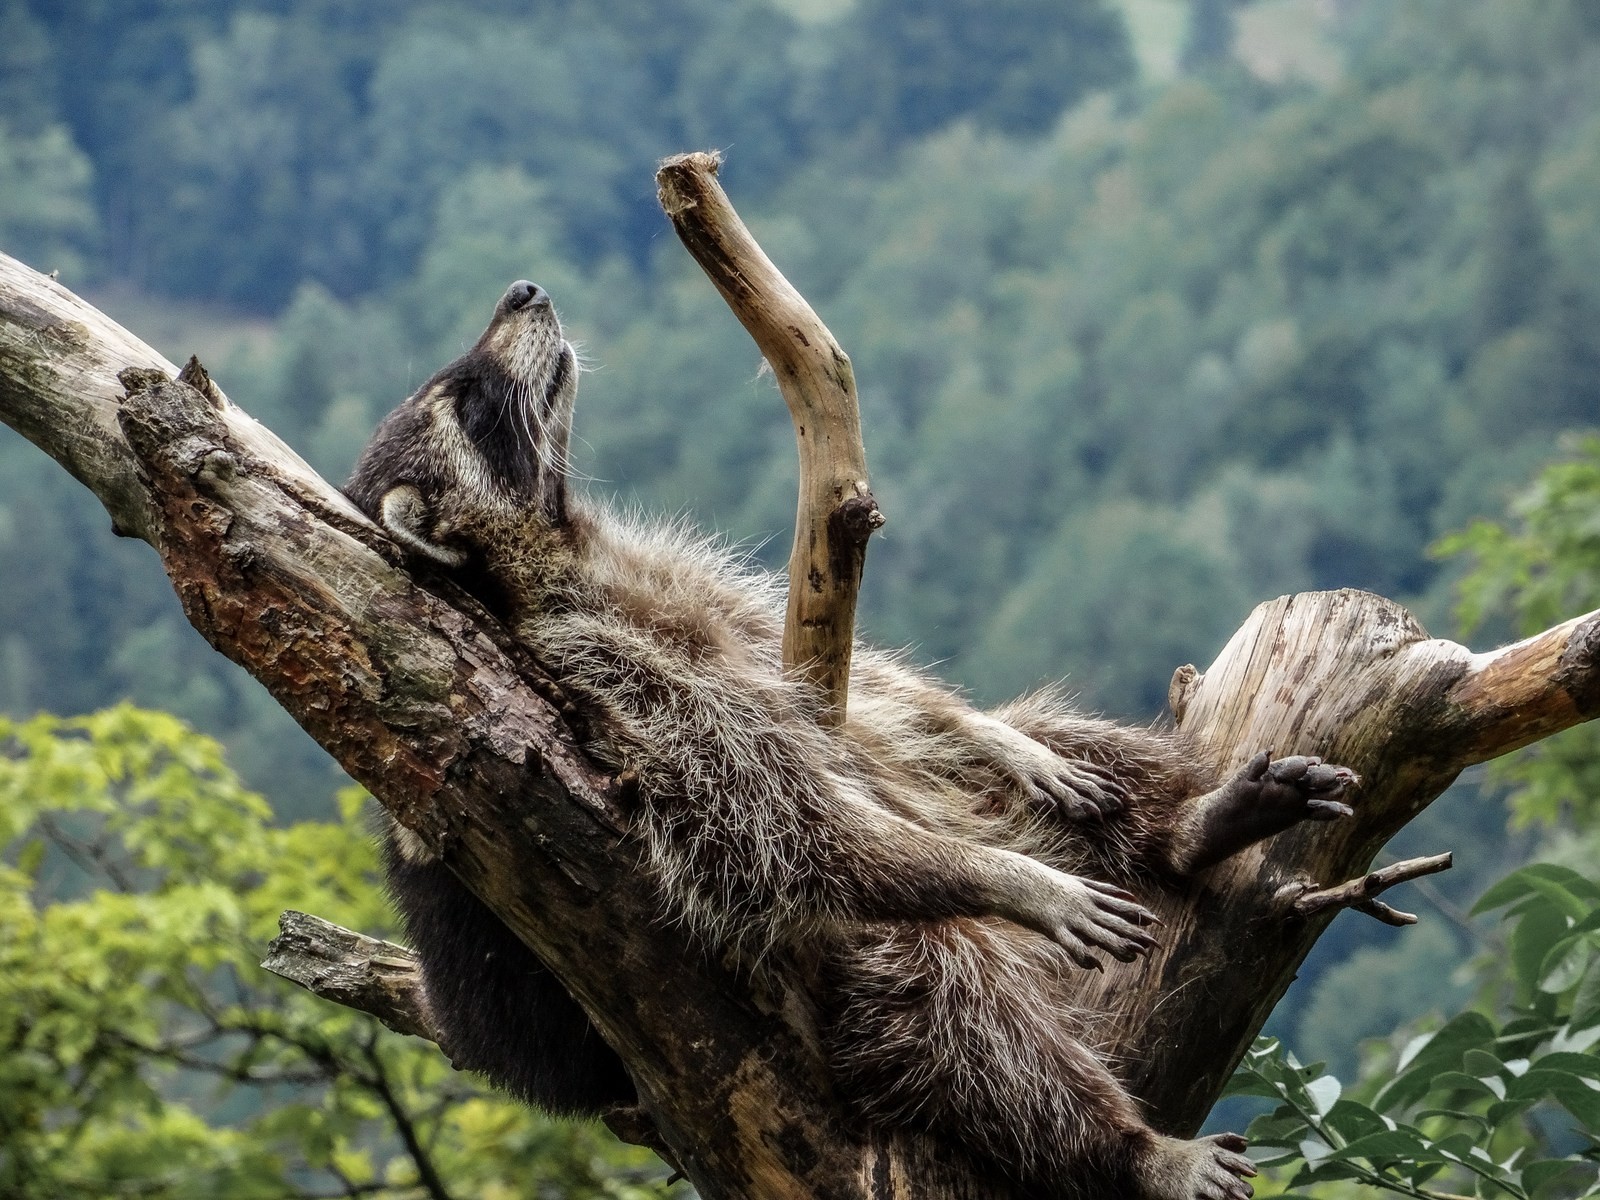 history of happiness, a racoon lying on the branch of the tree. 